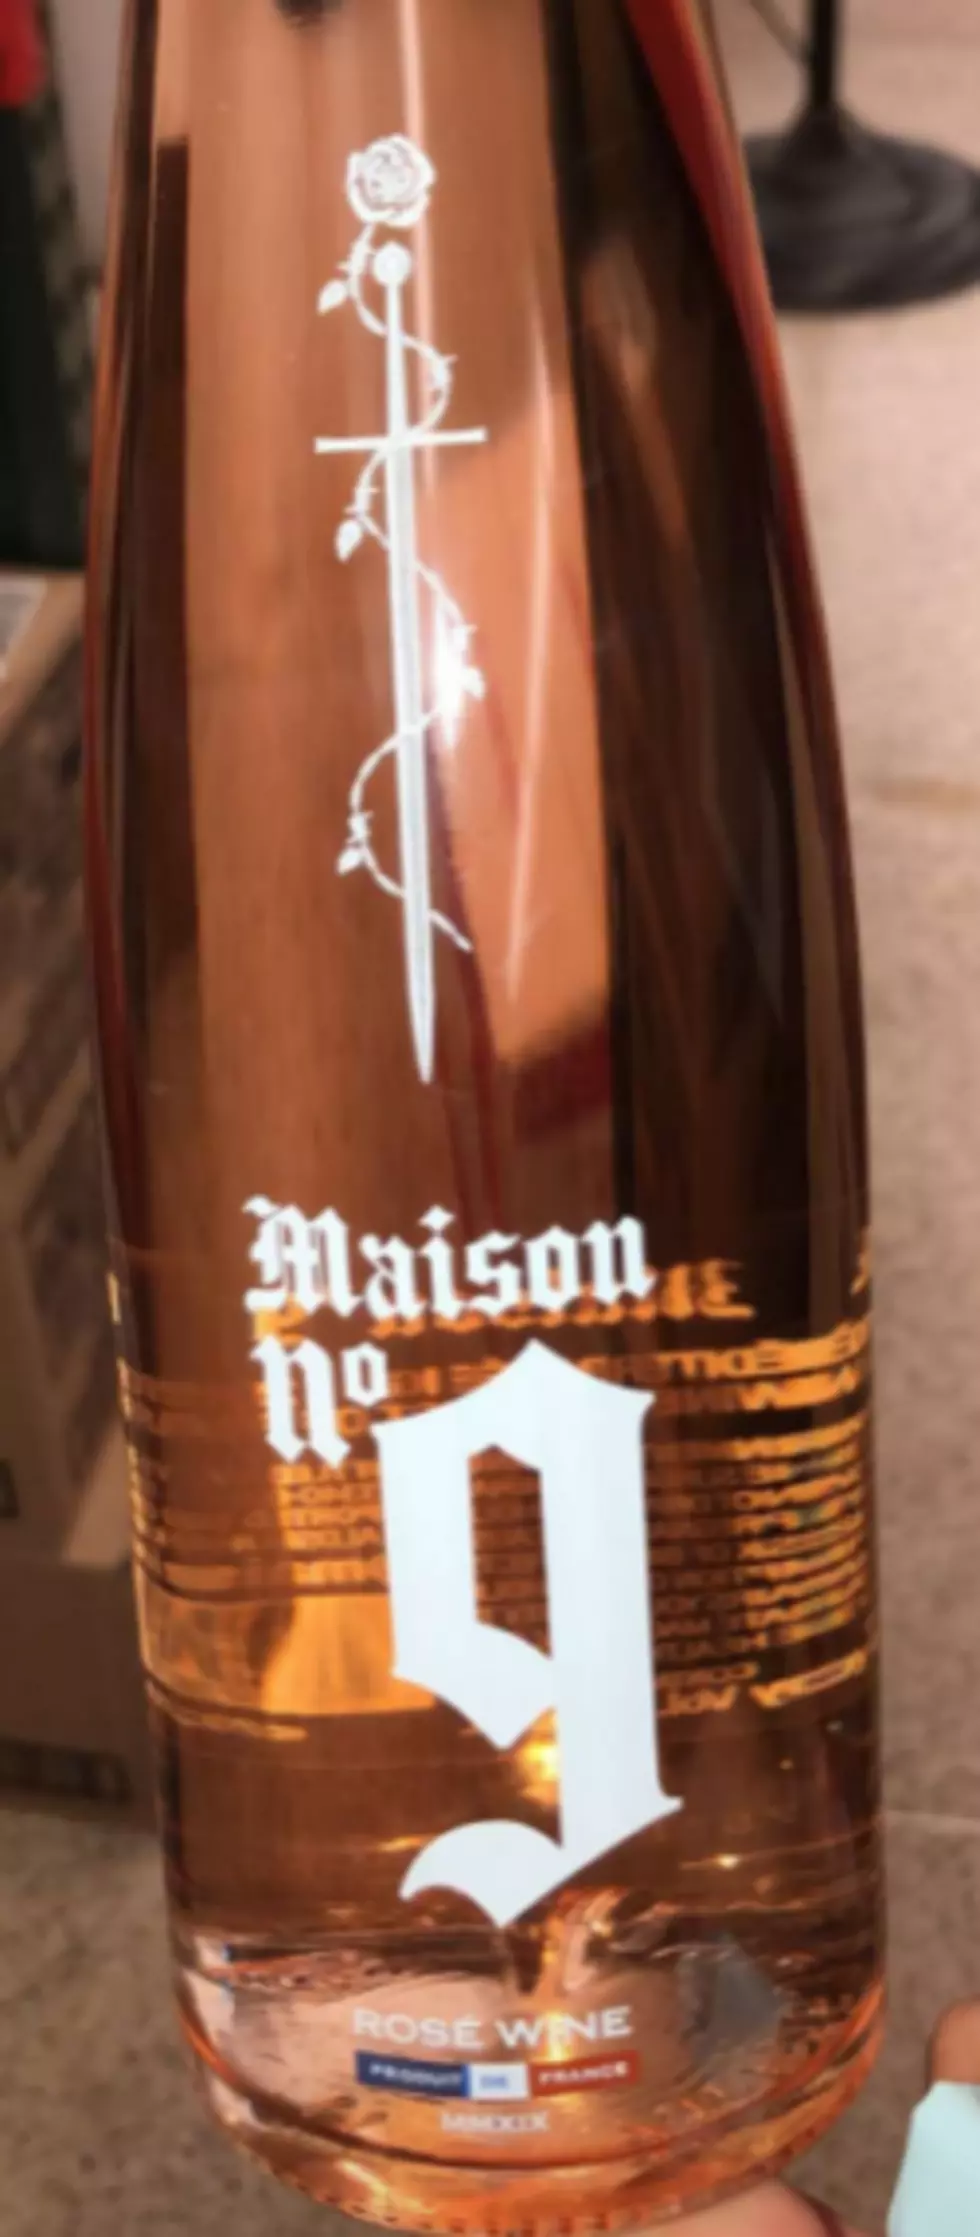 Check Out This Wine From This Rapper